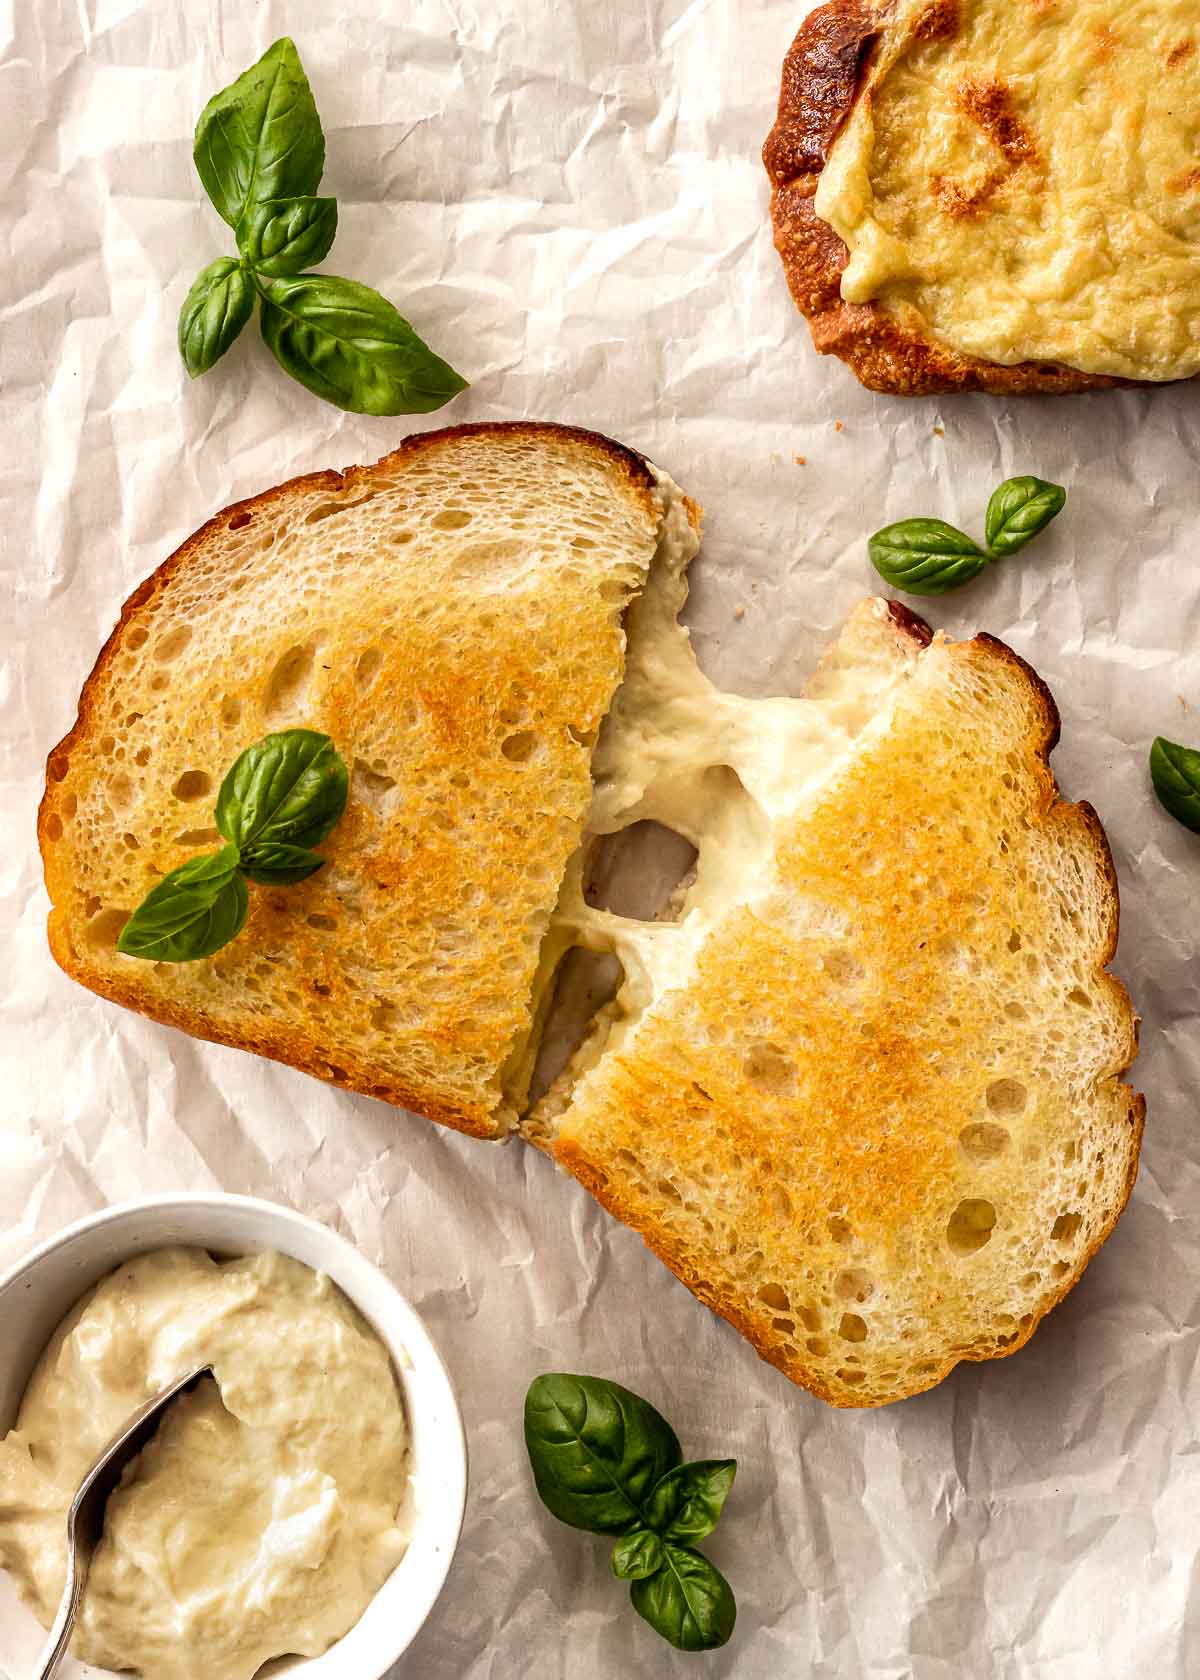 Vegan mozzarella shown in a grilled cheese sandwich with basil leaves scattered around.